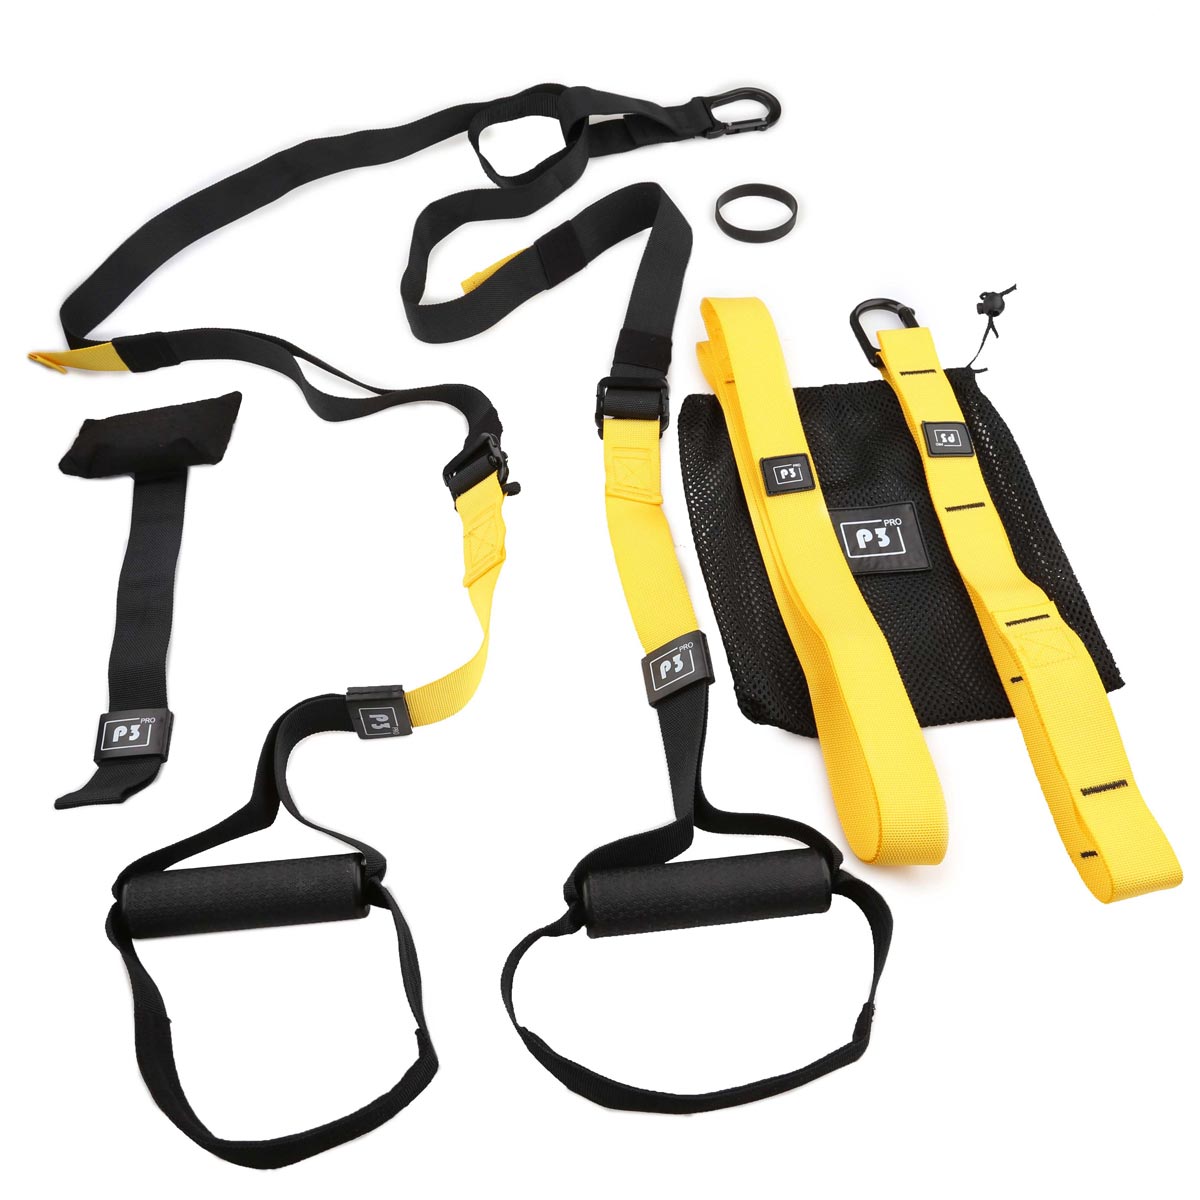 HOMESTRONG SUSPENSION TRAINER